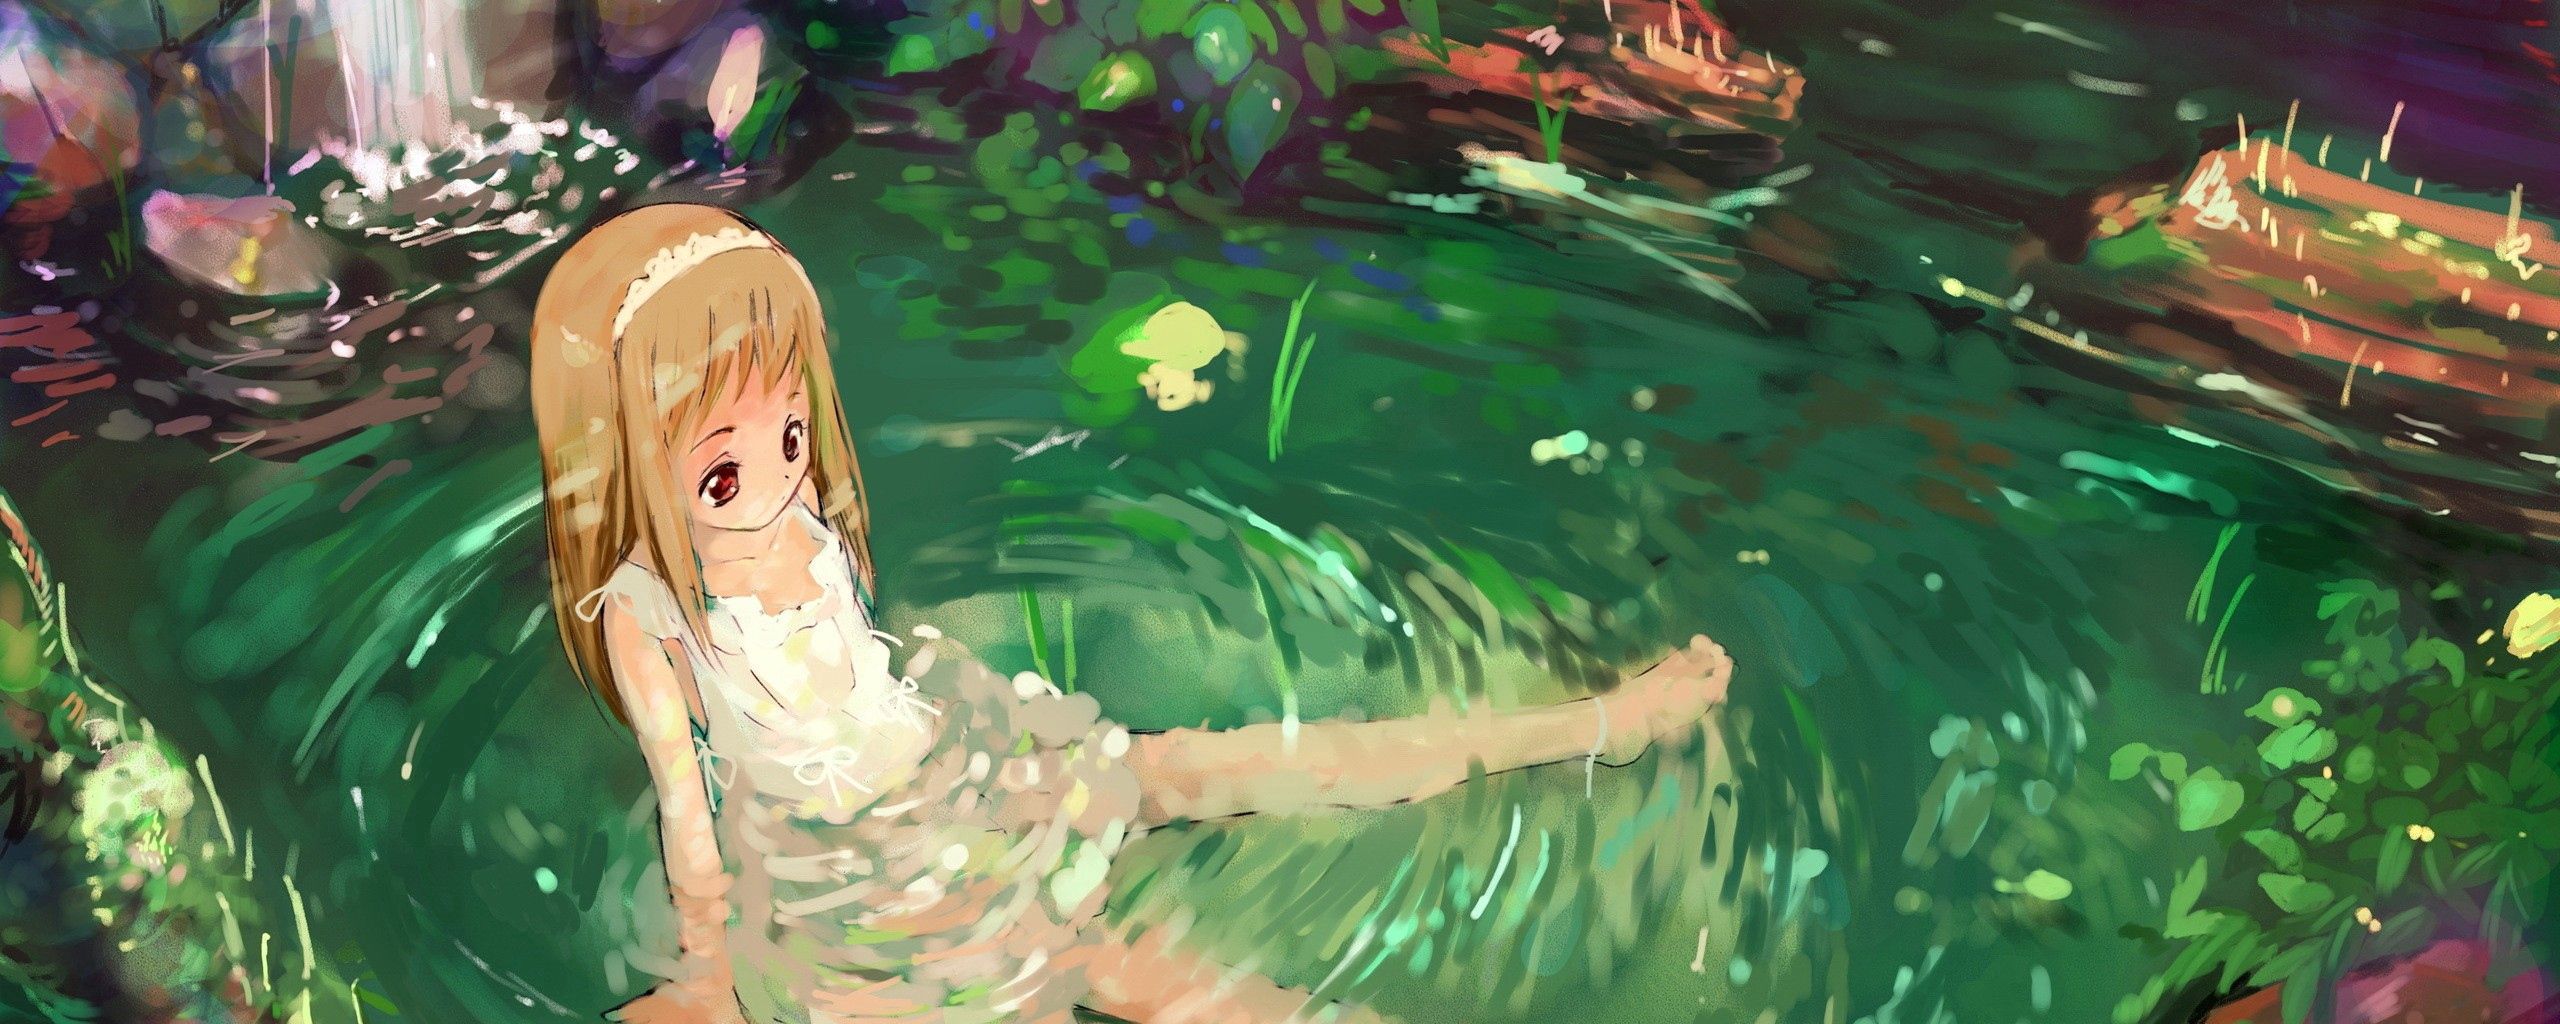 Download wallpapers 2560x1024 anime, girl, nature, water, sadness